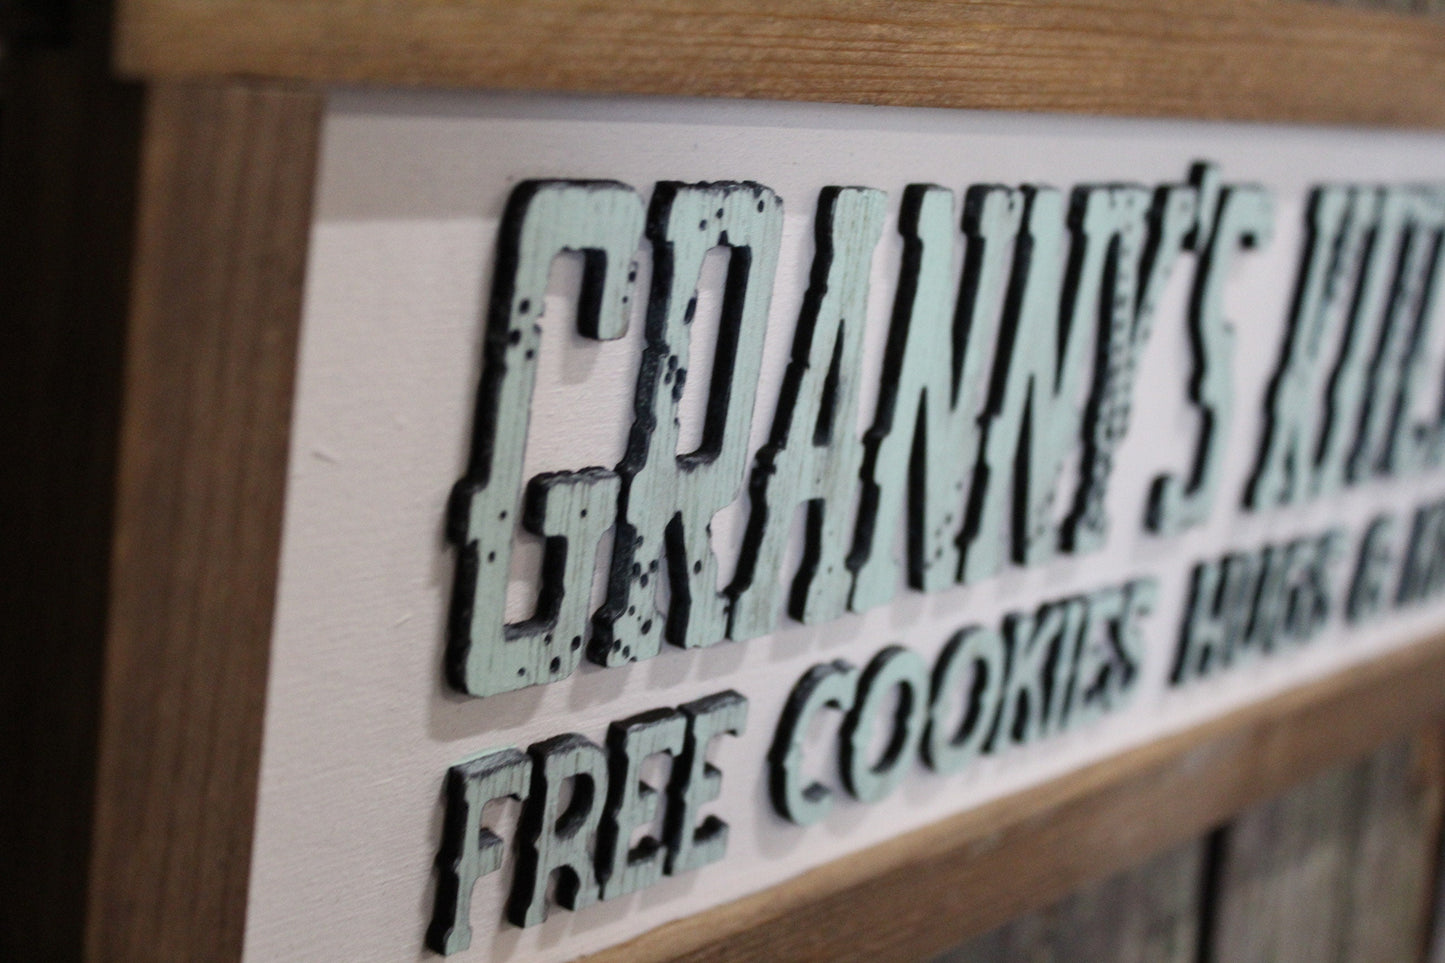 Granny's Kitchen Free Cookies Hugs & Kisses Wood Sign Grandma Mothers Day Gift Pastel 3D Raised Text Farmhouse Handmade Rustic Primitive